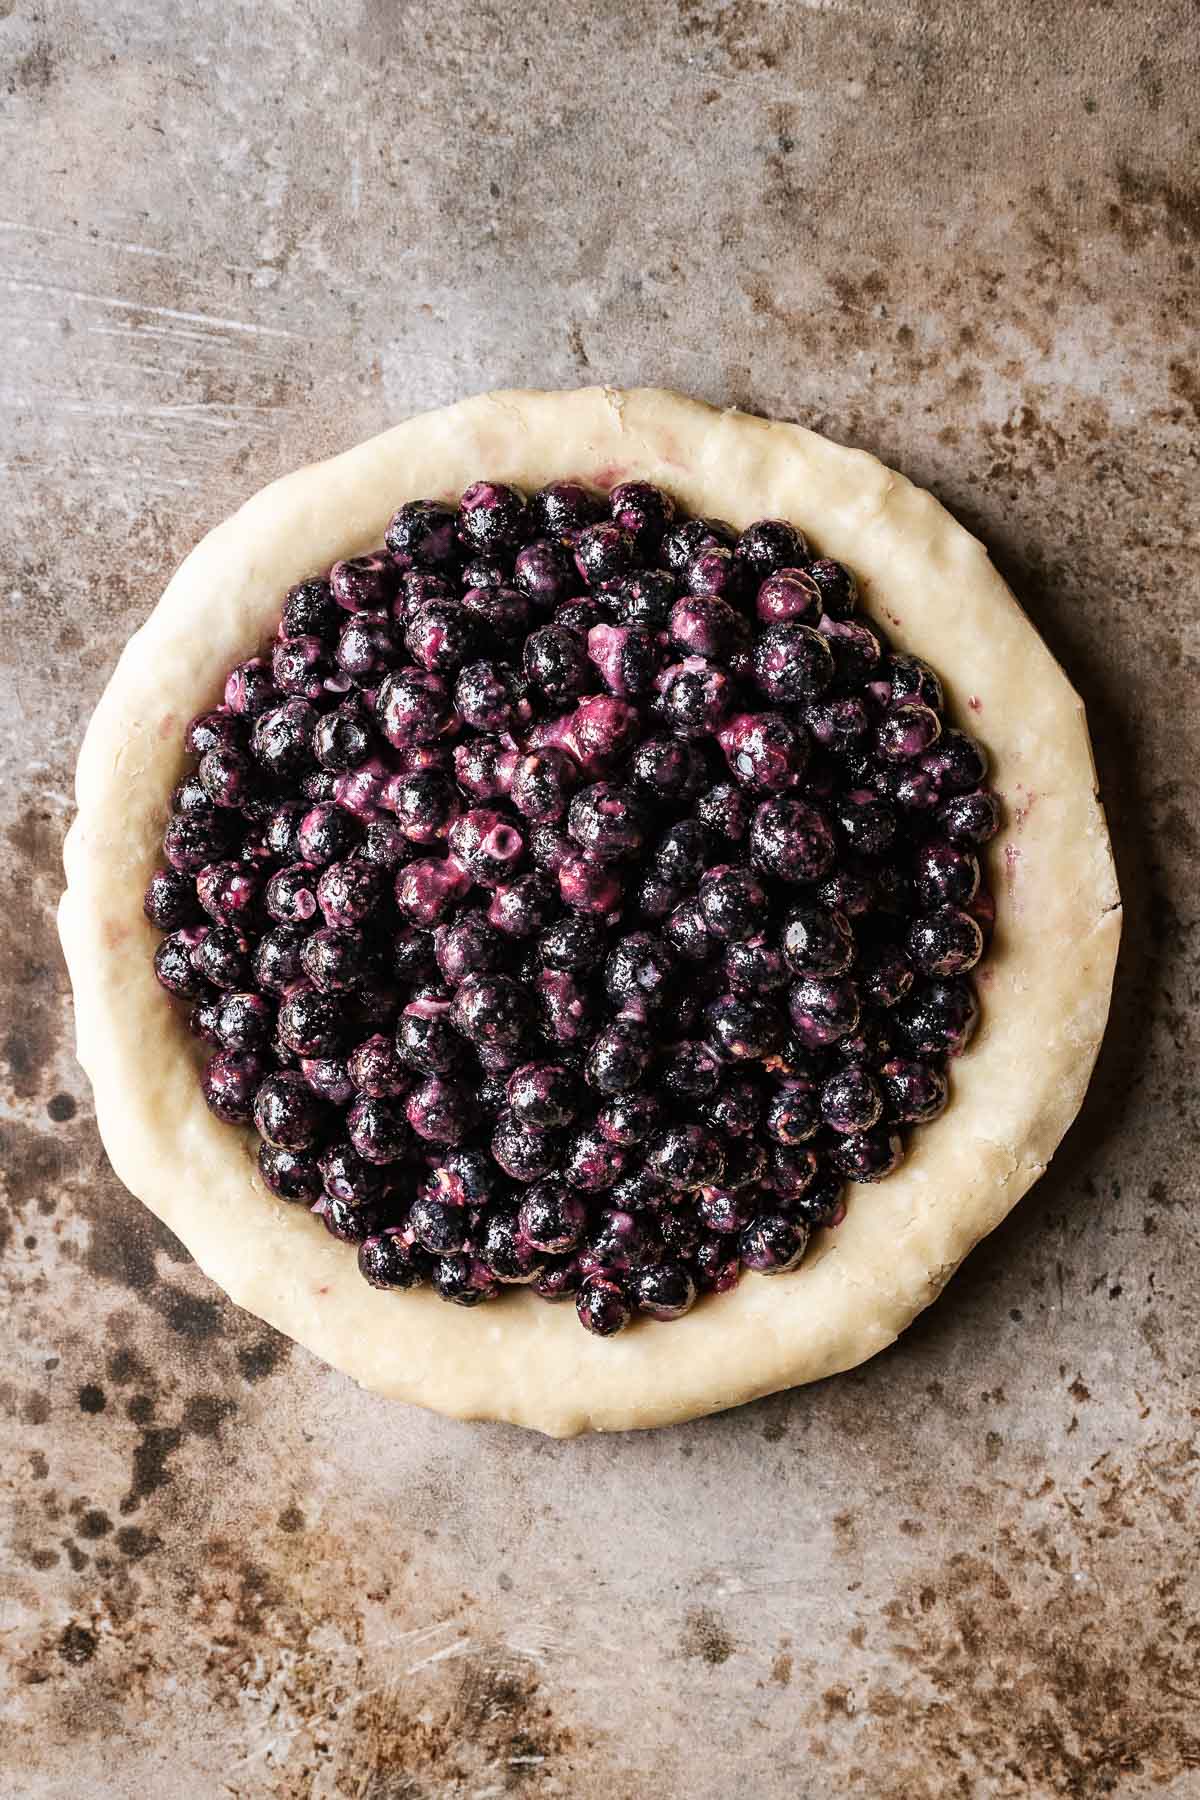 An unbaked bottom pie crust filled with frozen berries.